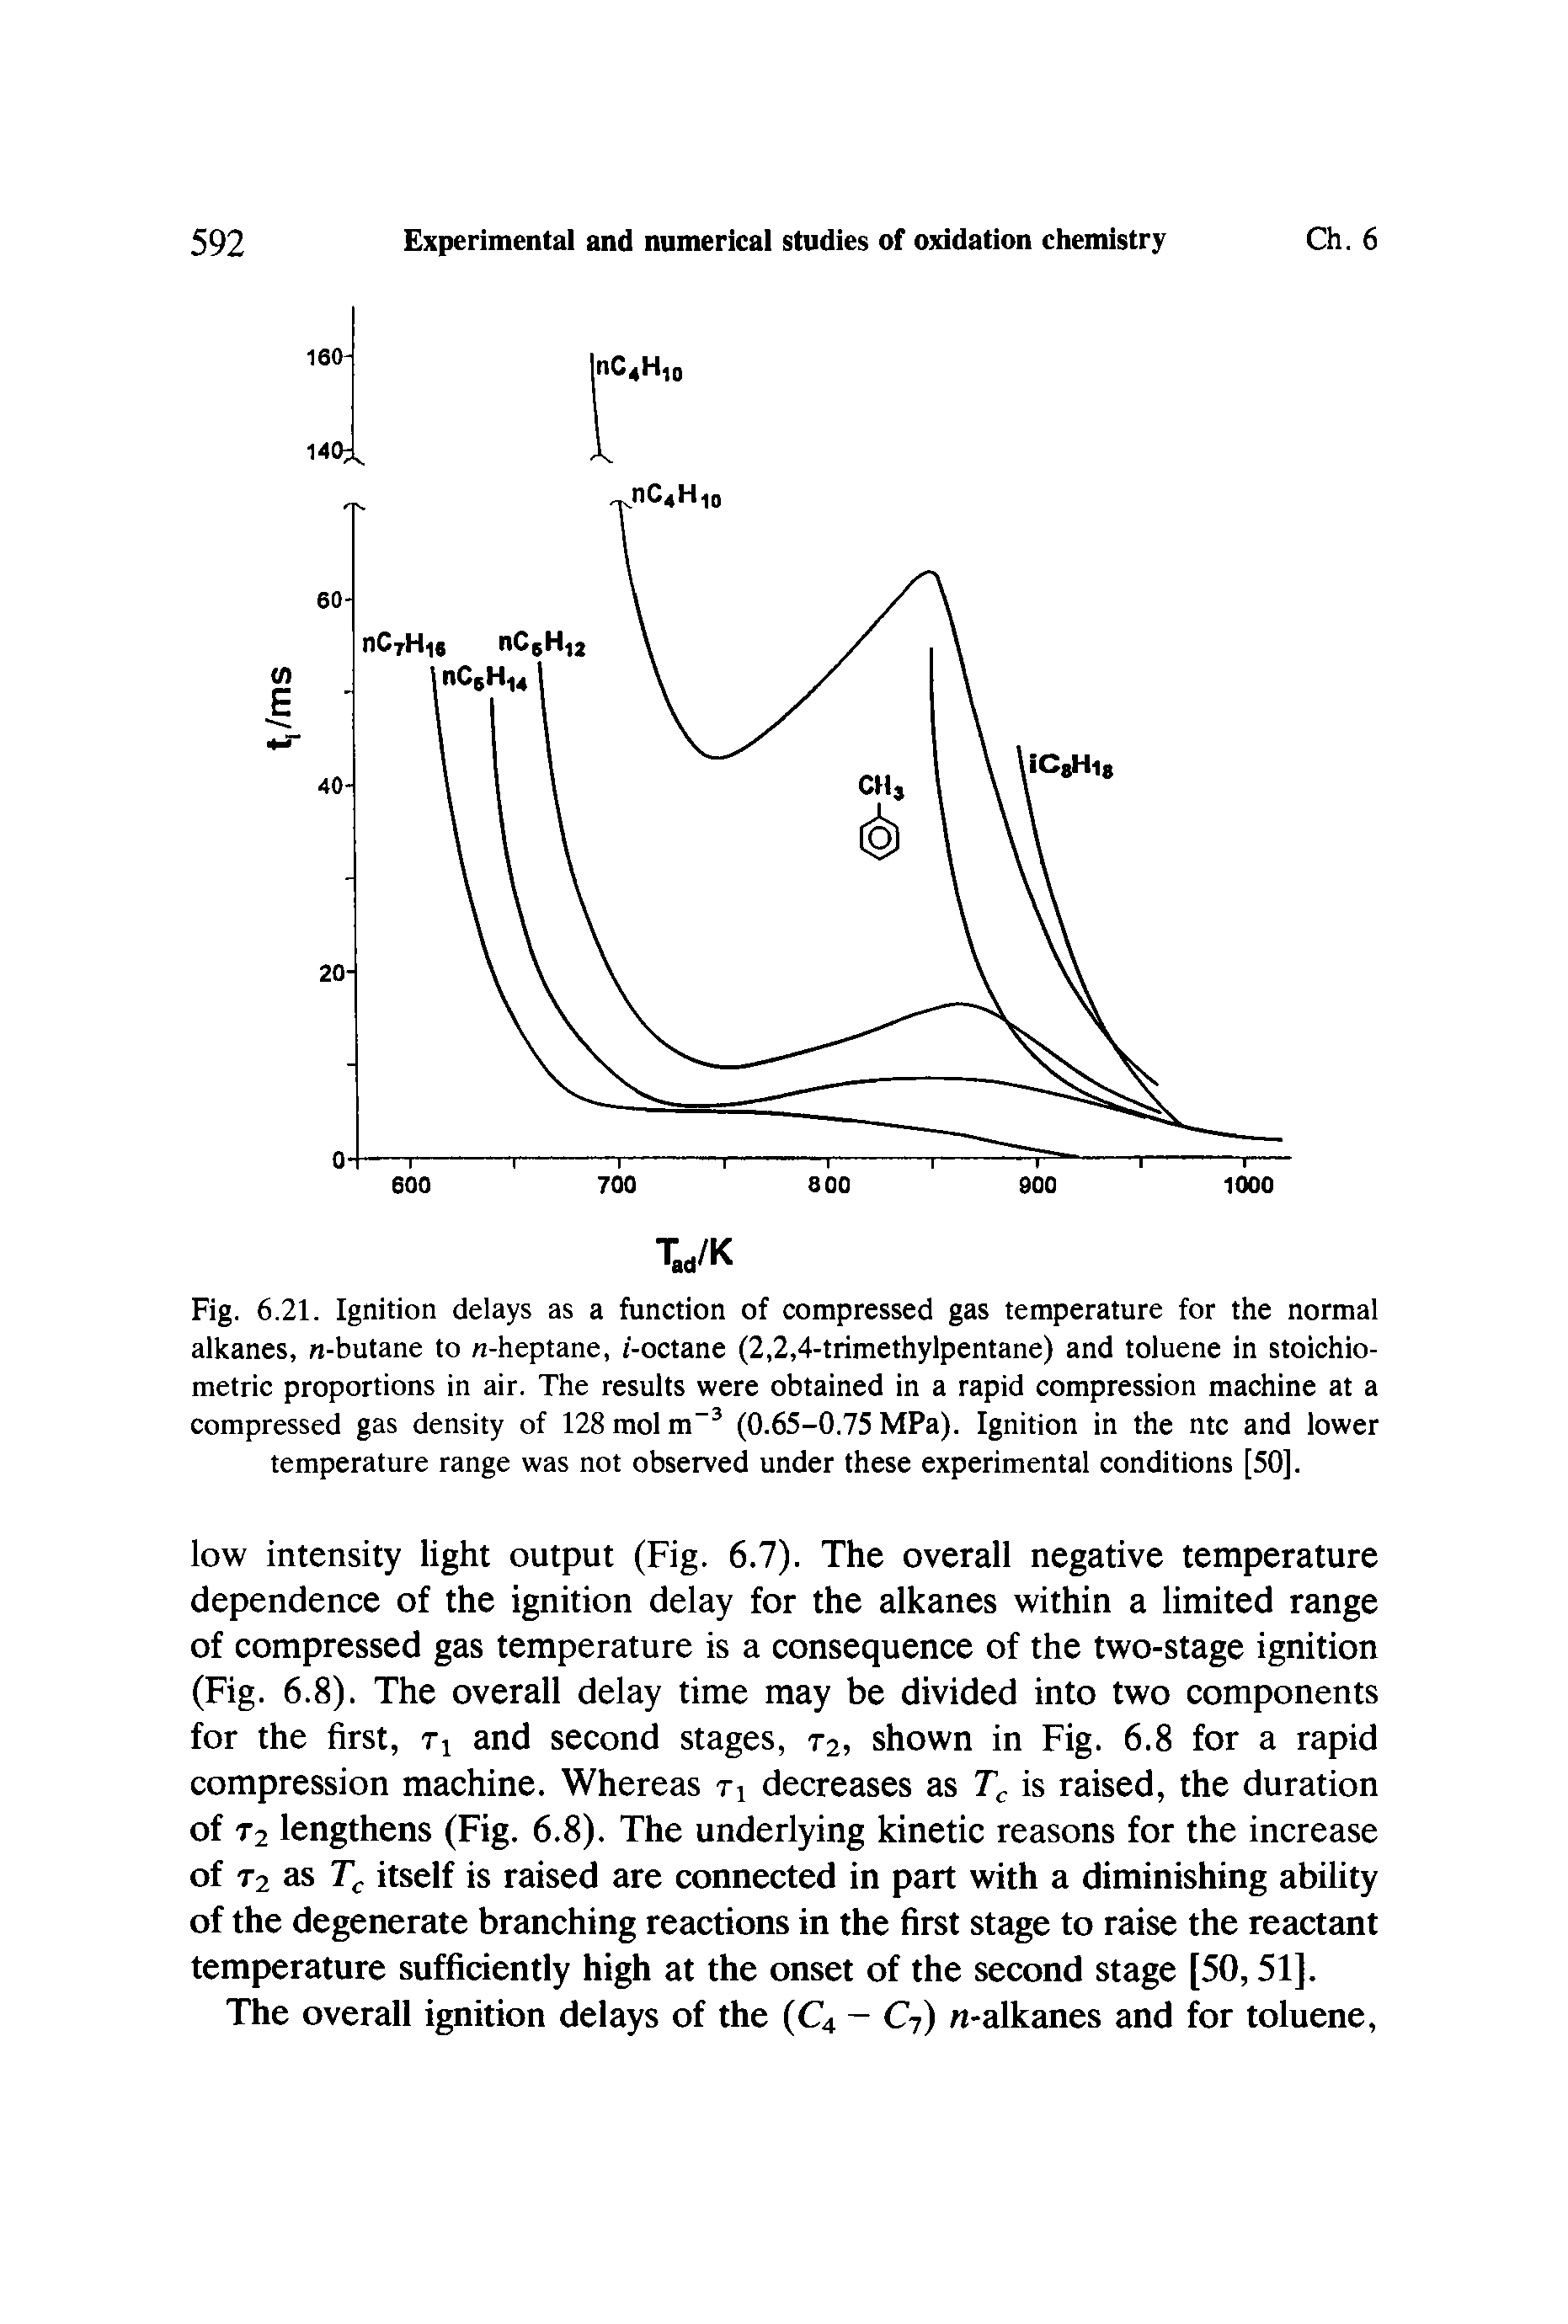 Fig. 6. 21. Ignition delays as a function of compressed gas temperature for the normal alkanes, n-butane to n-heptane, i-octane (2,2,4-trimethylpentane) and toluene in stoichiometric proportions in air. The results were obtained in a rapid compression machine at a compressed gas density of 128 mol m (0.65-0.75 MPa). Ignition in the ntc and lower temperature range was not observed under these experimental conditions [50].